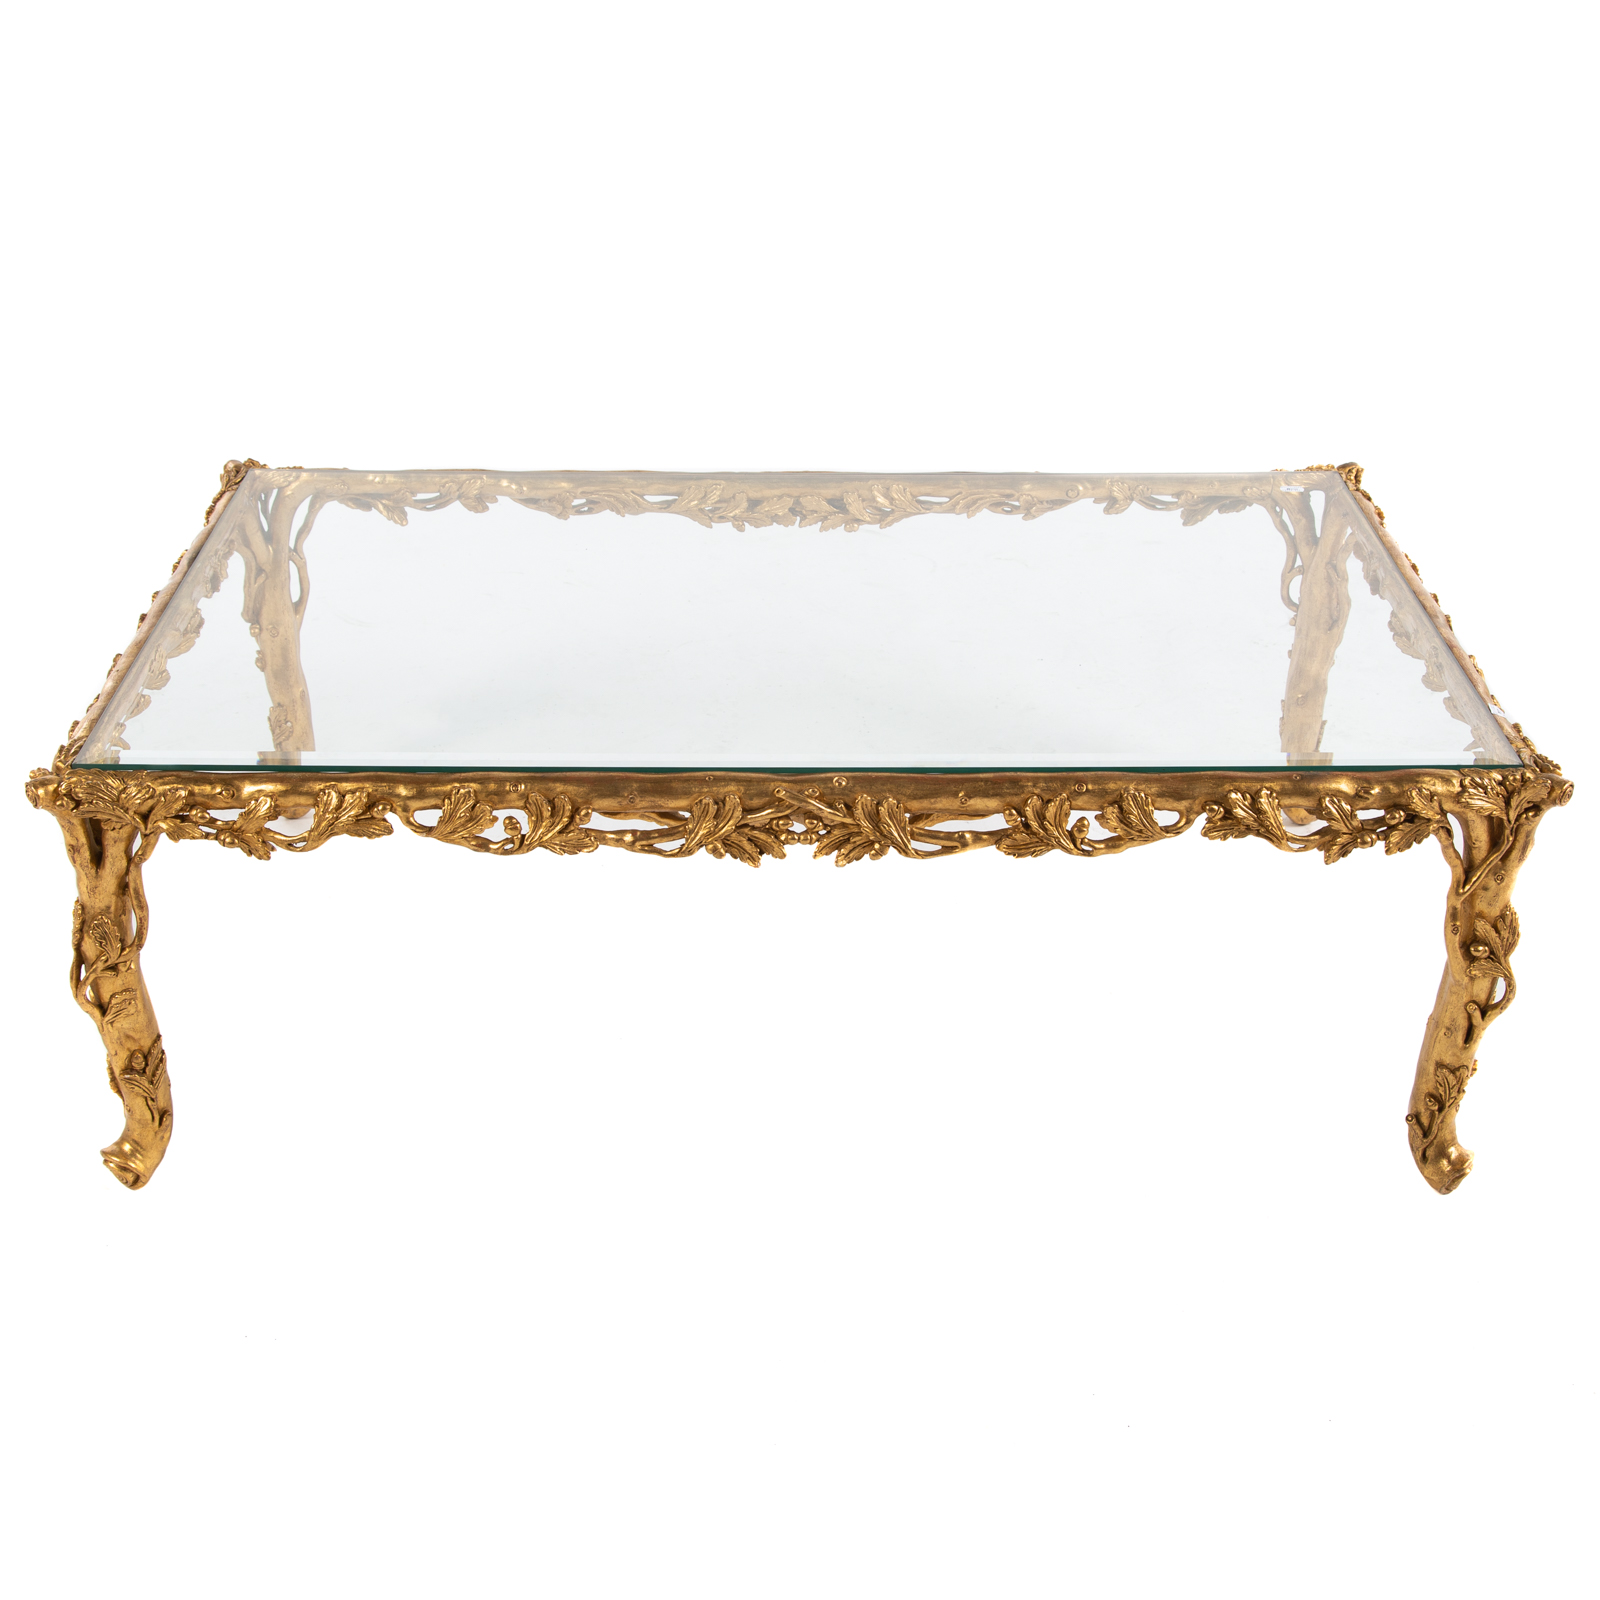 GILTWOOD & GLASS COFFEE TABLE 20th